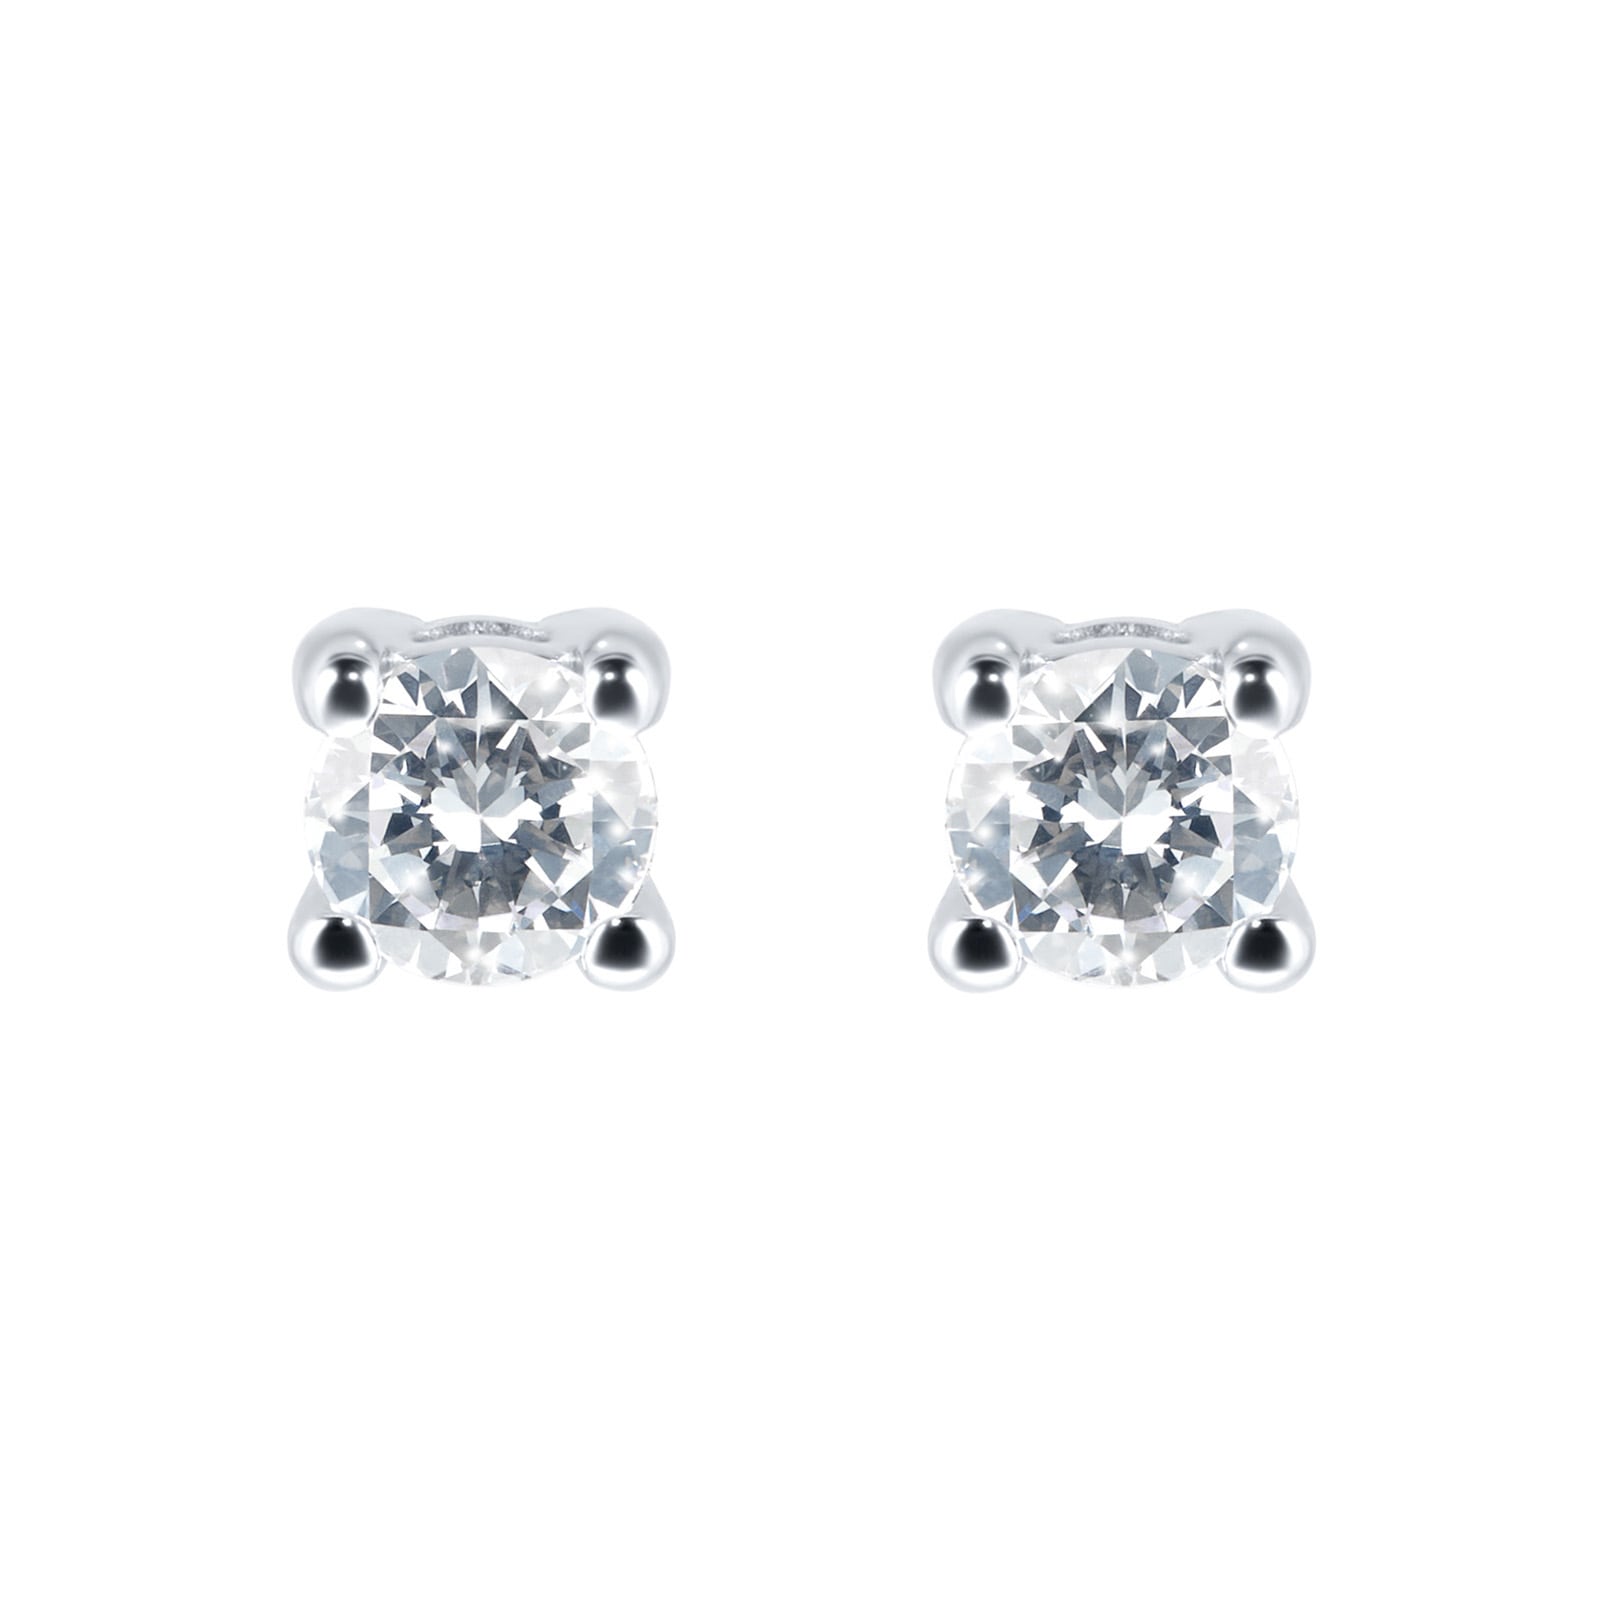 9ct White Gold 0.15ct 4 Claw Goldsmiths Brightest Diamond Earrings